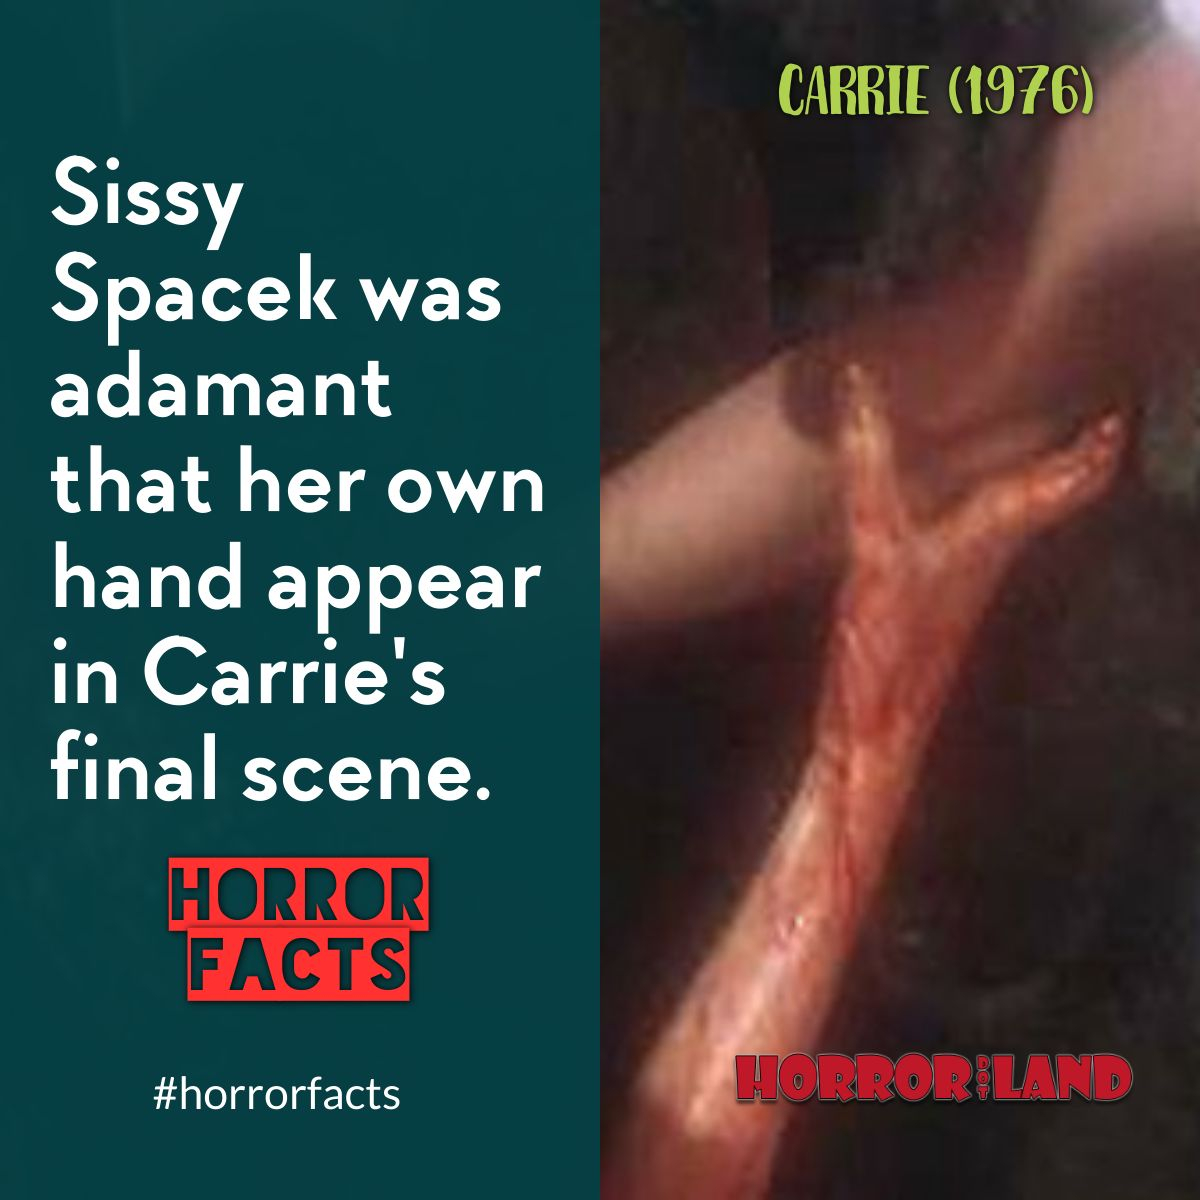 Carrie (1976) #horrorfacts